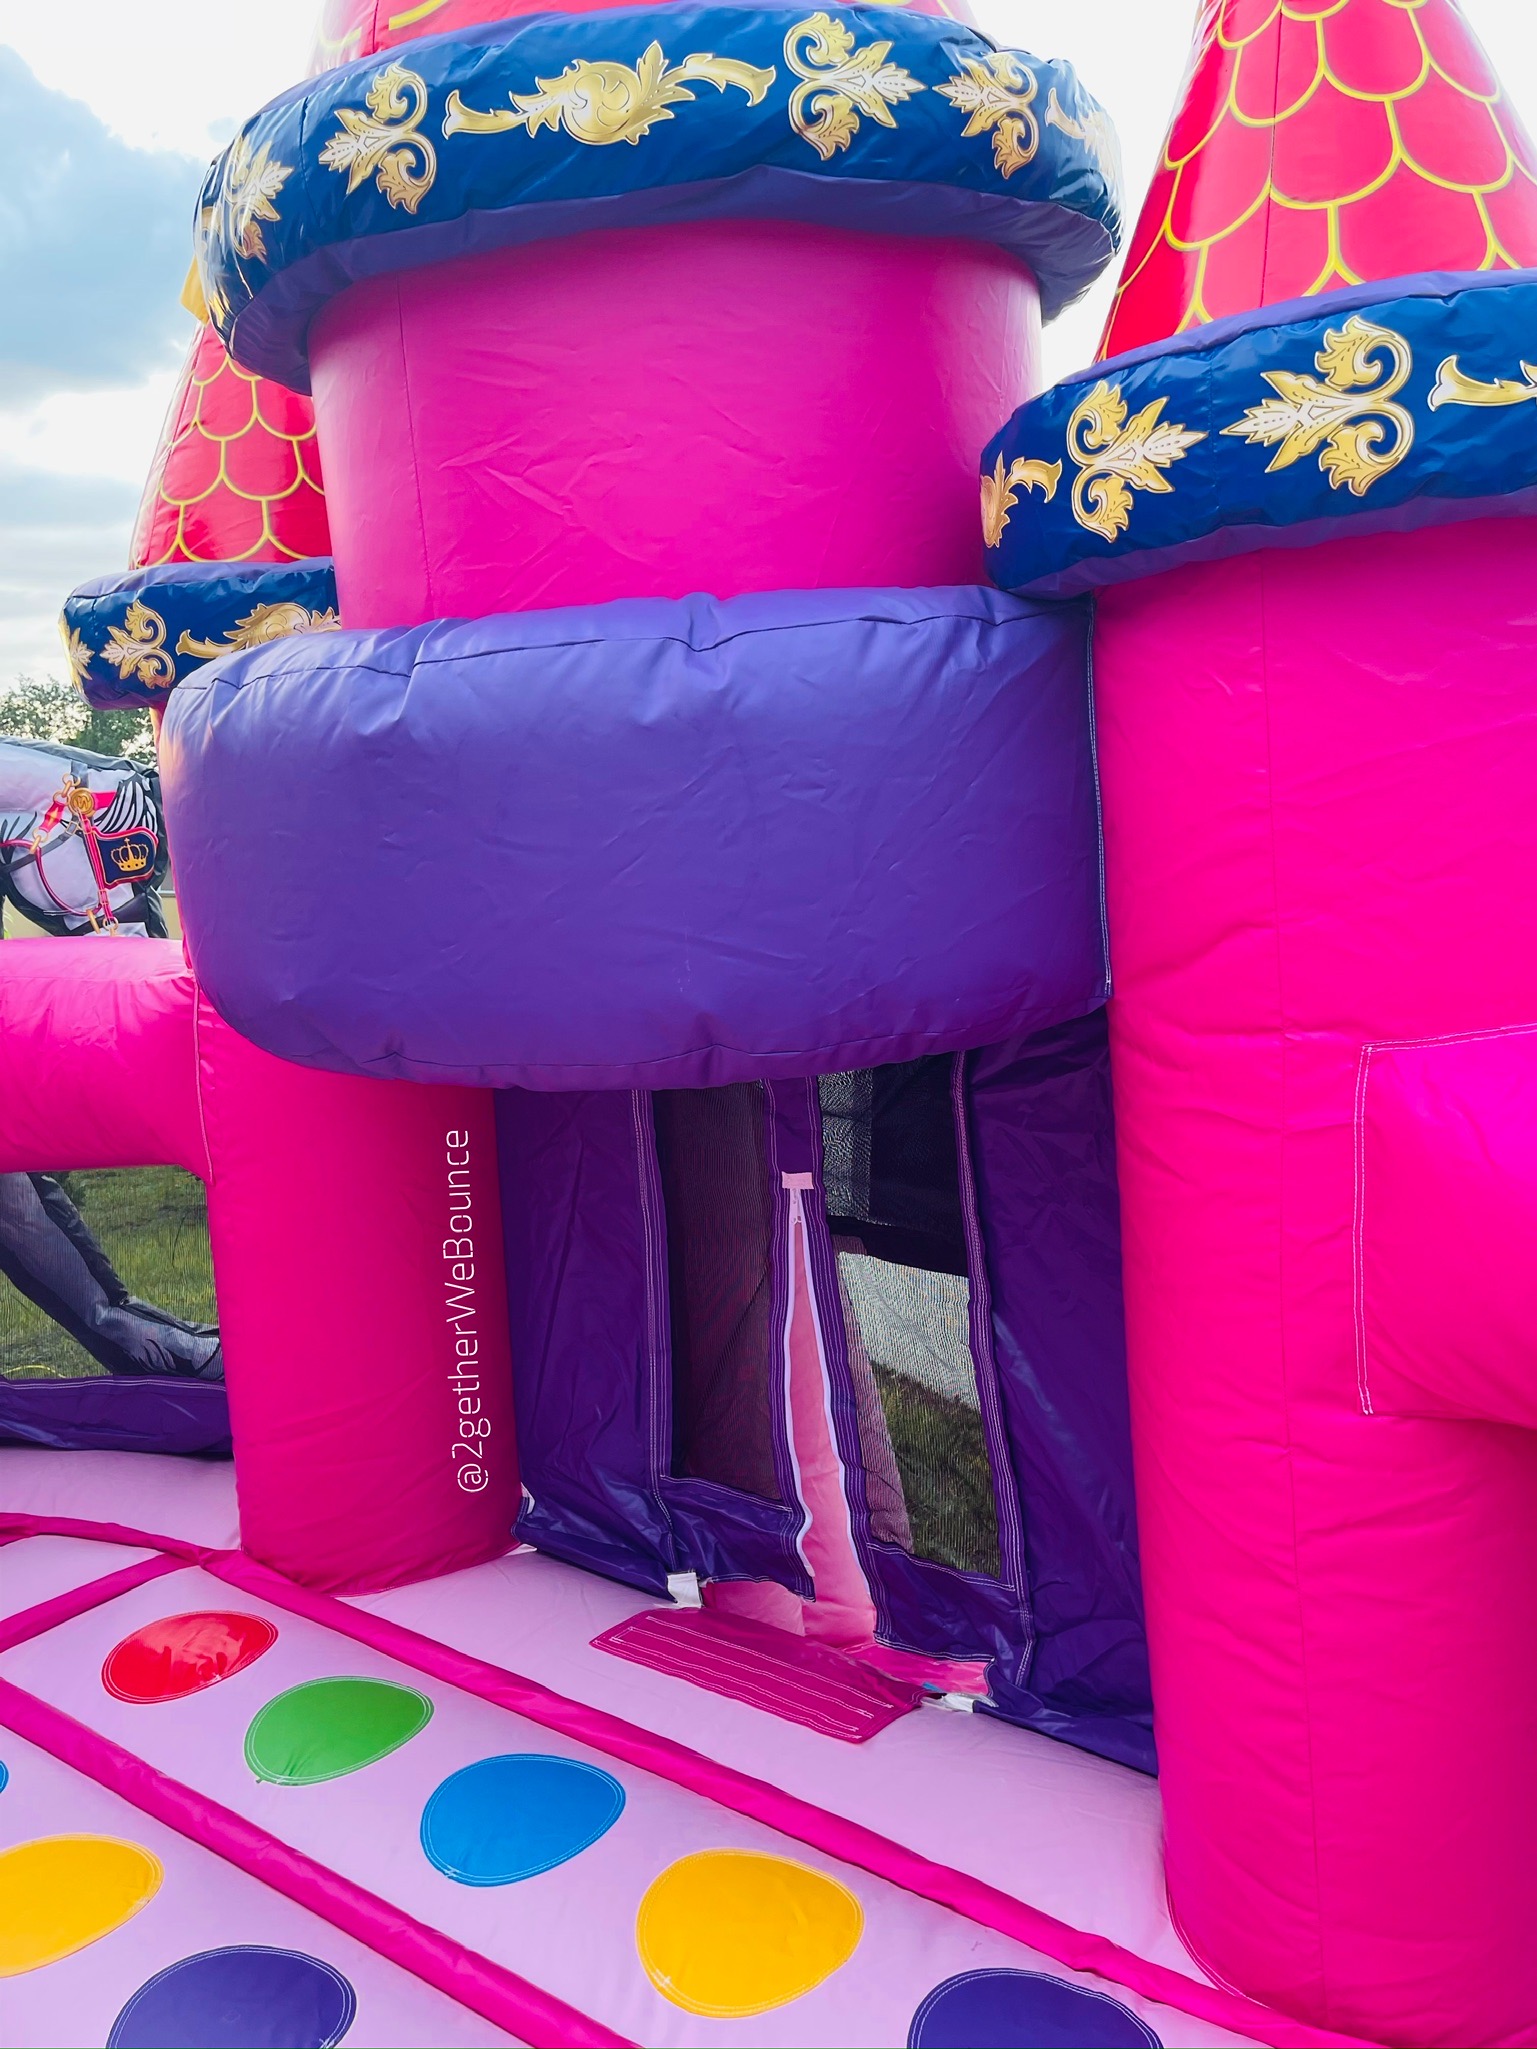 Princess Palace Bounce Slide Let S Throw The Best Party 2gether Waterslides And More In